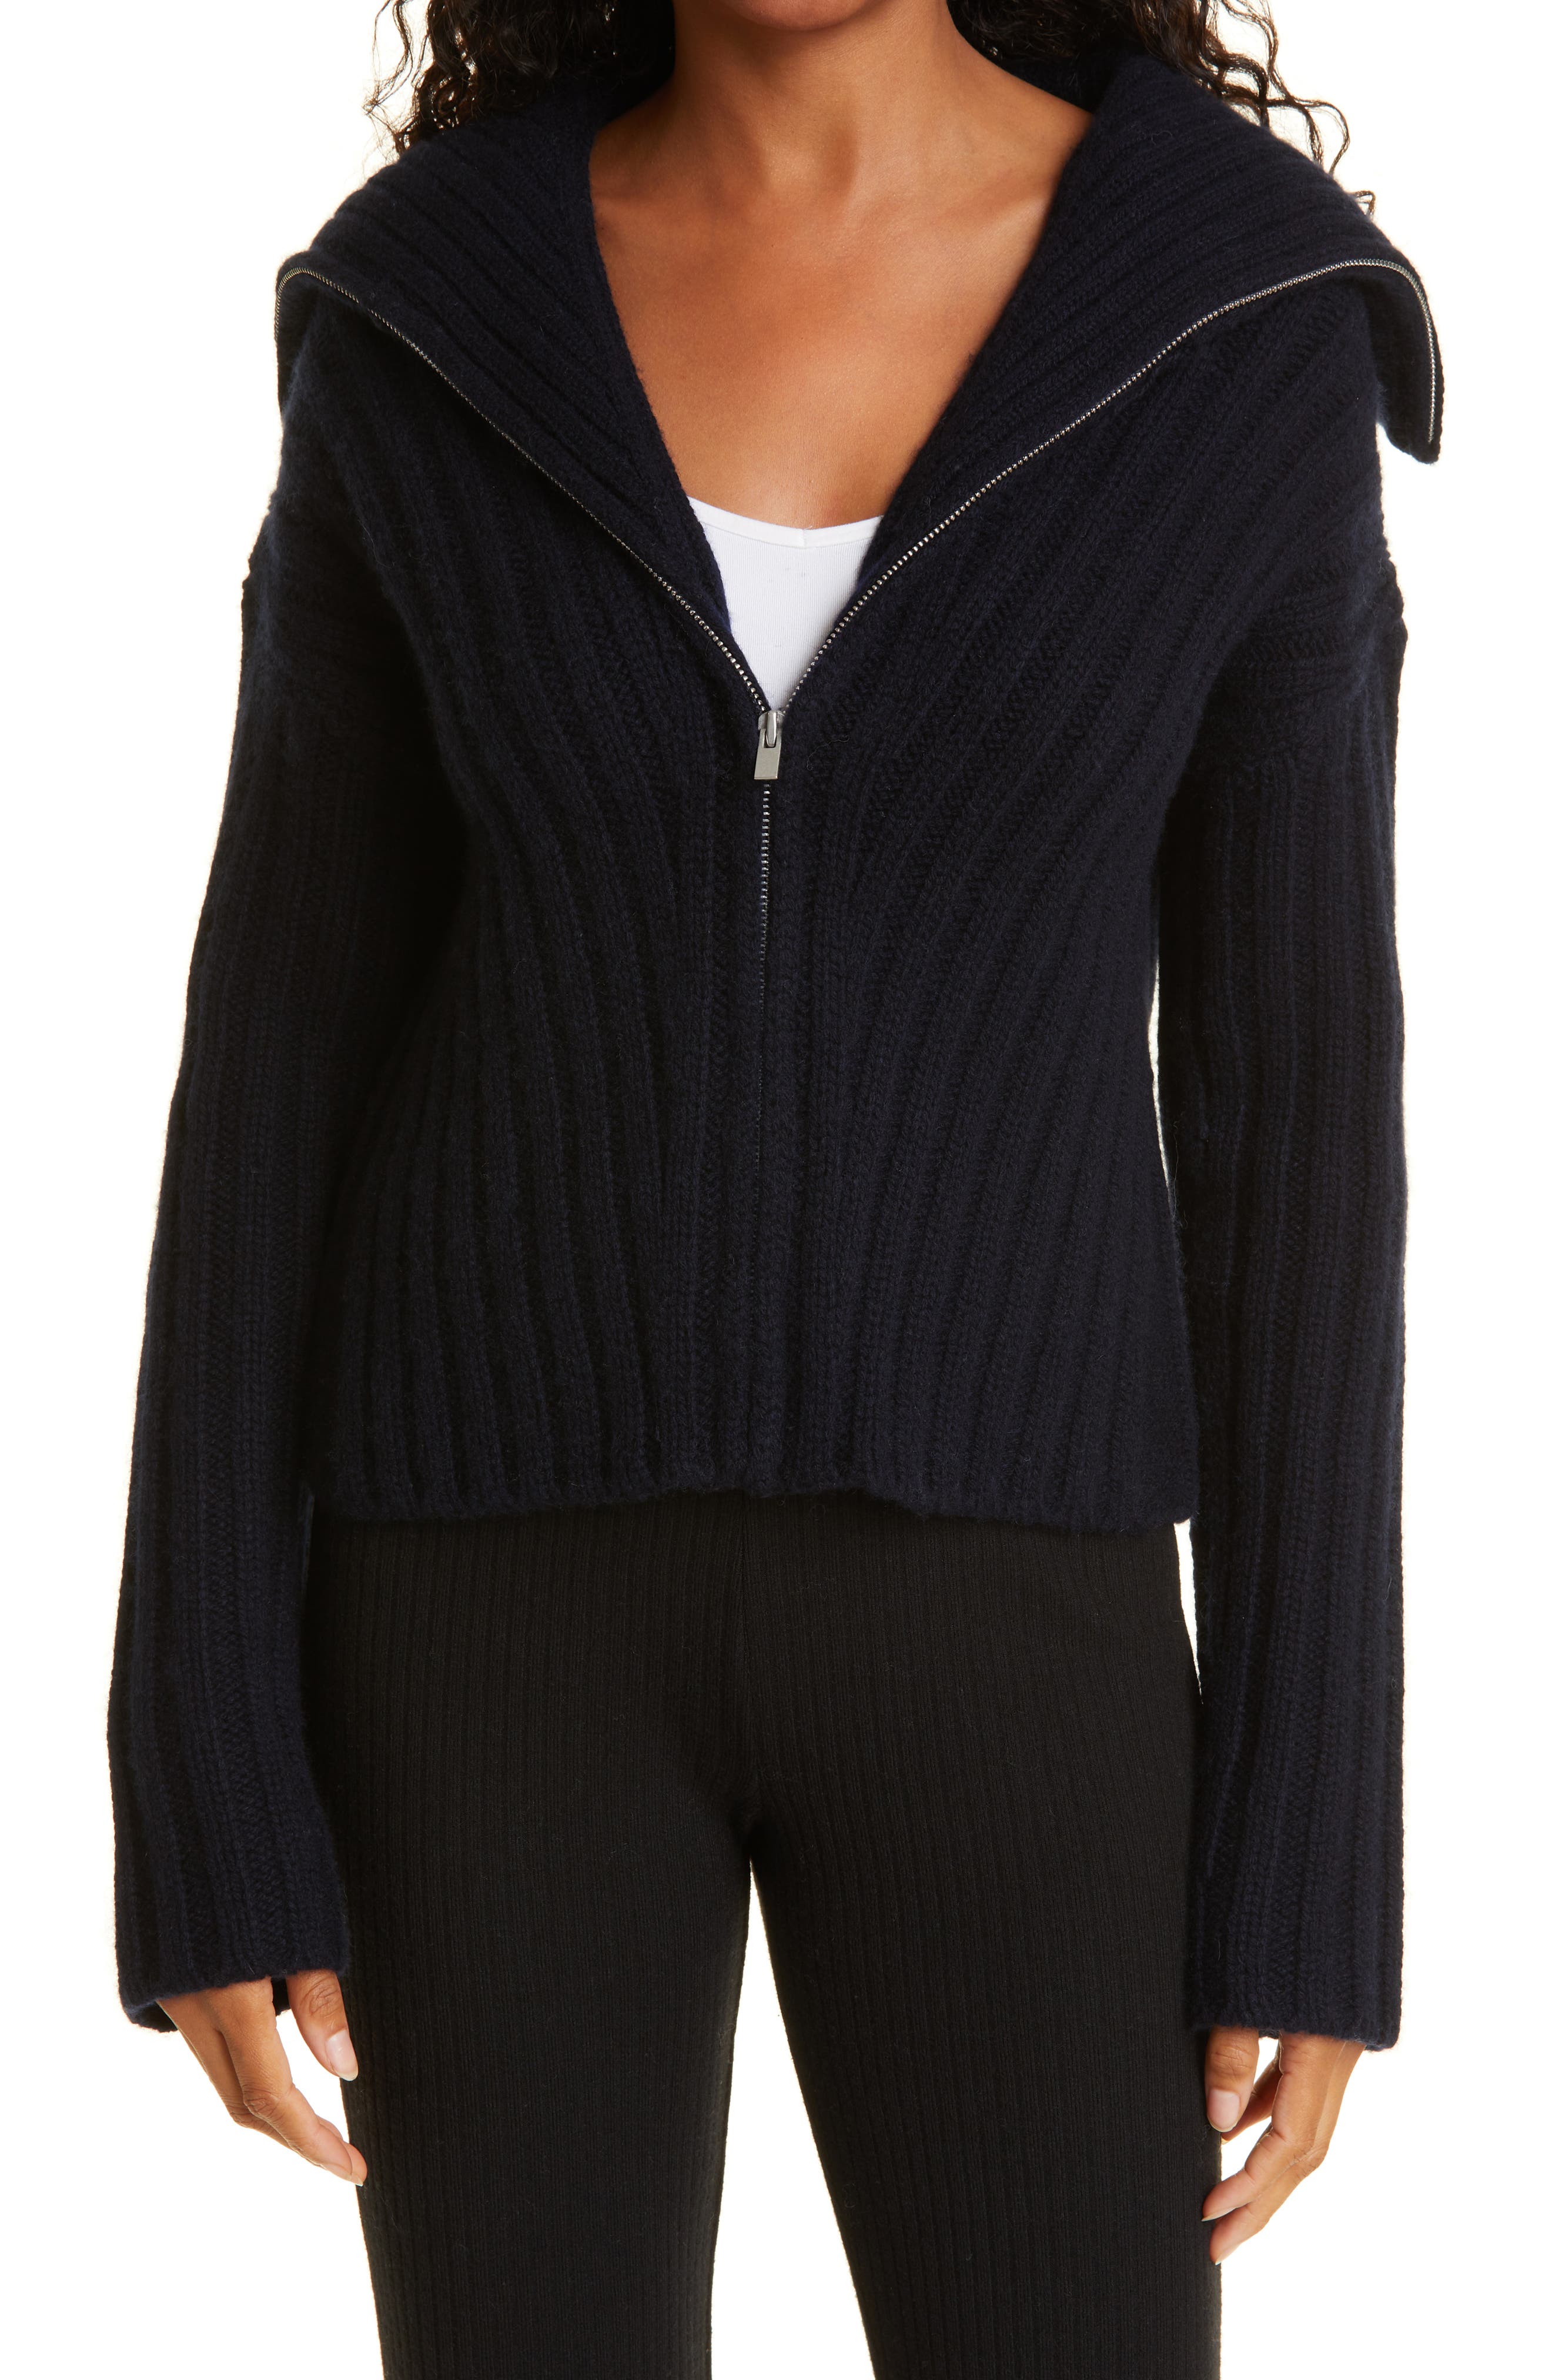 VINCE Wool & Cashmere Zip-Up Sweater in 403Cbl-Coastal